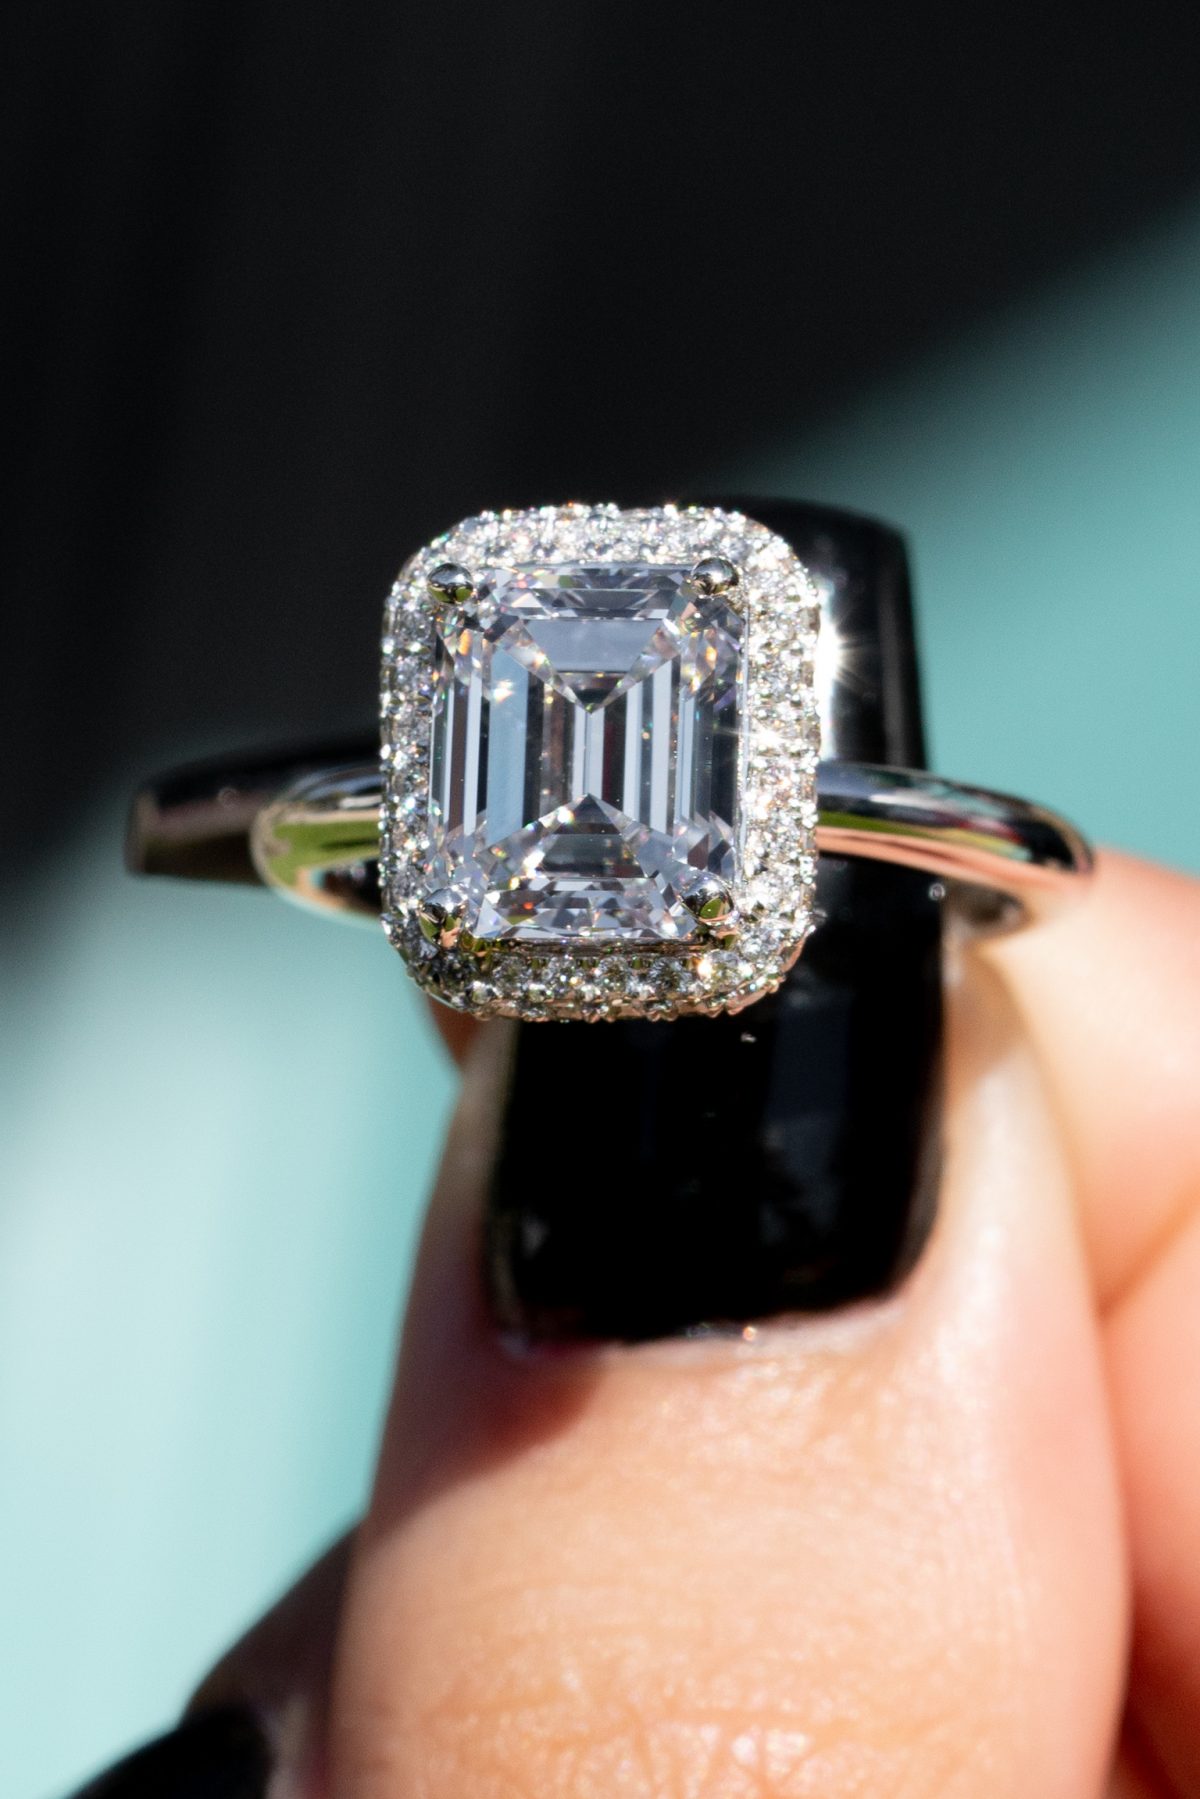 What is special about the emerald halo engagement ring?